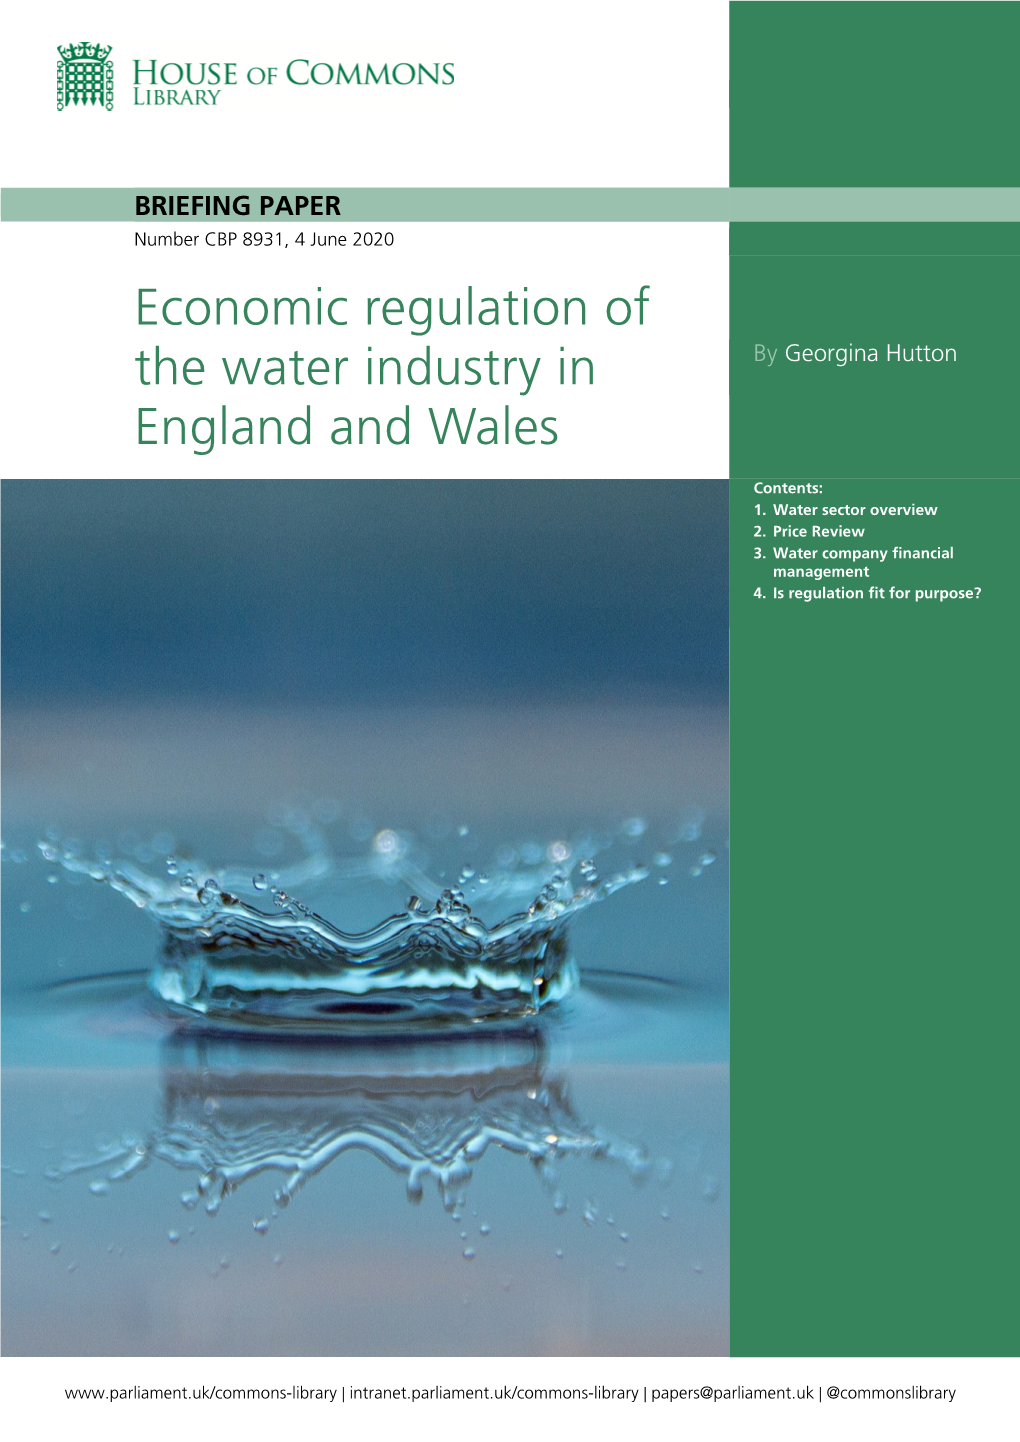 Economic Regulation of the Water Industry in England and Wales